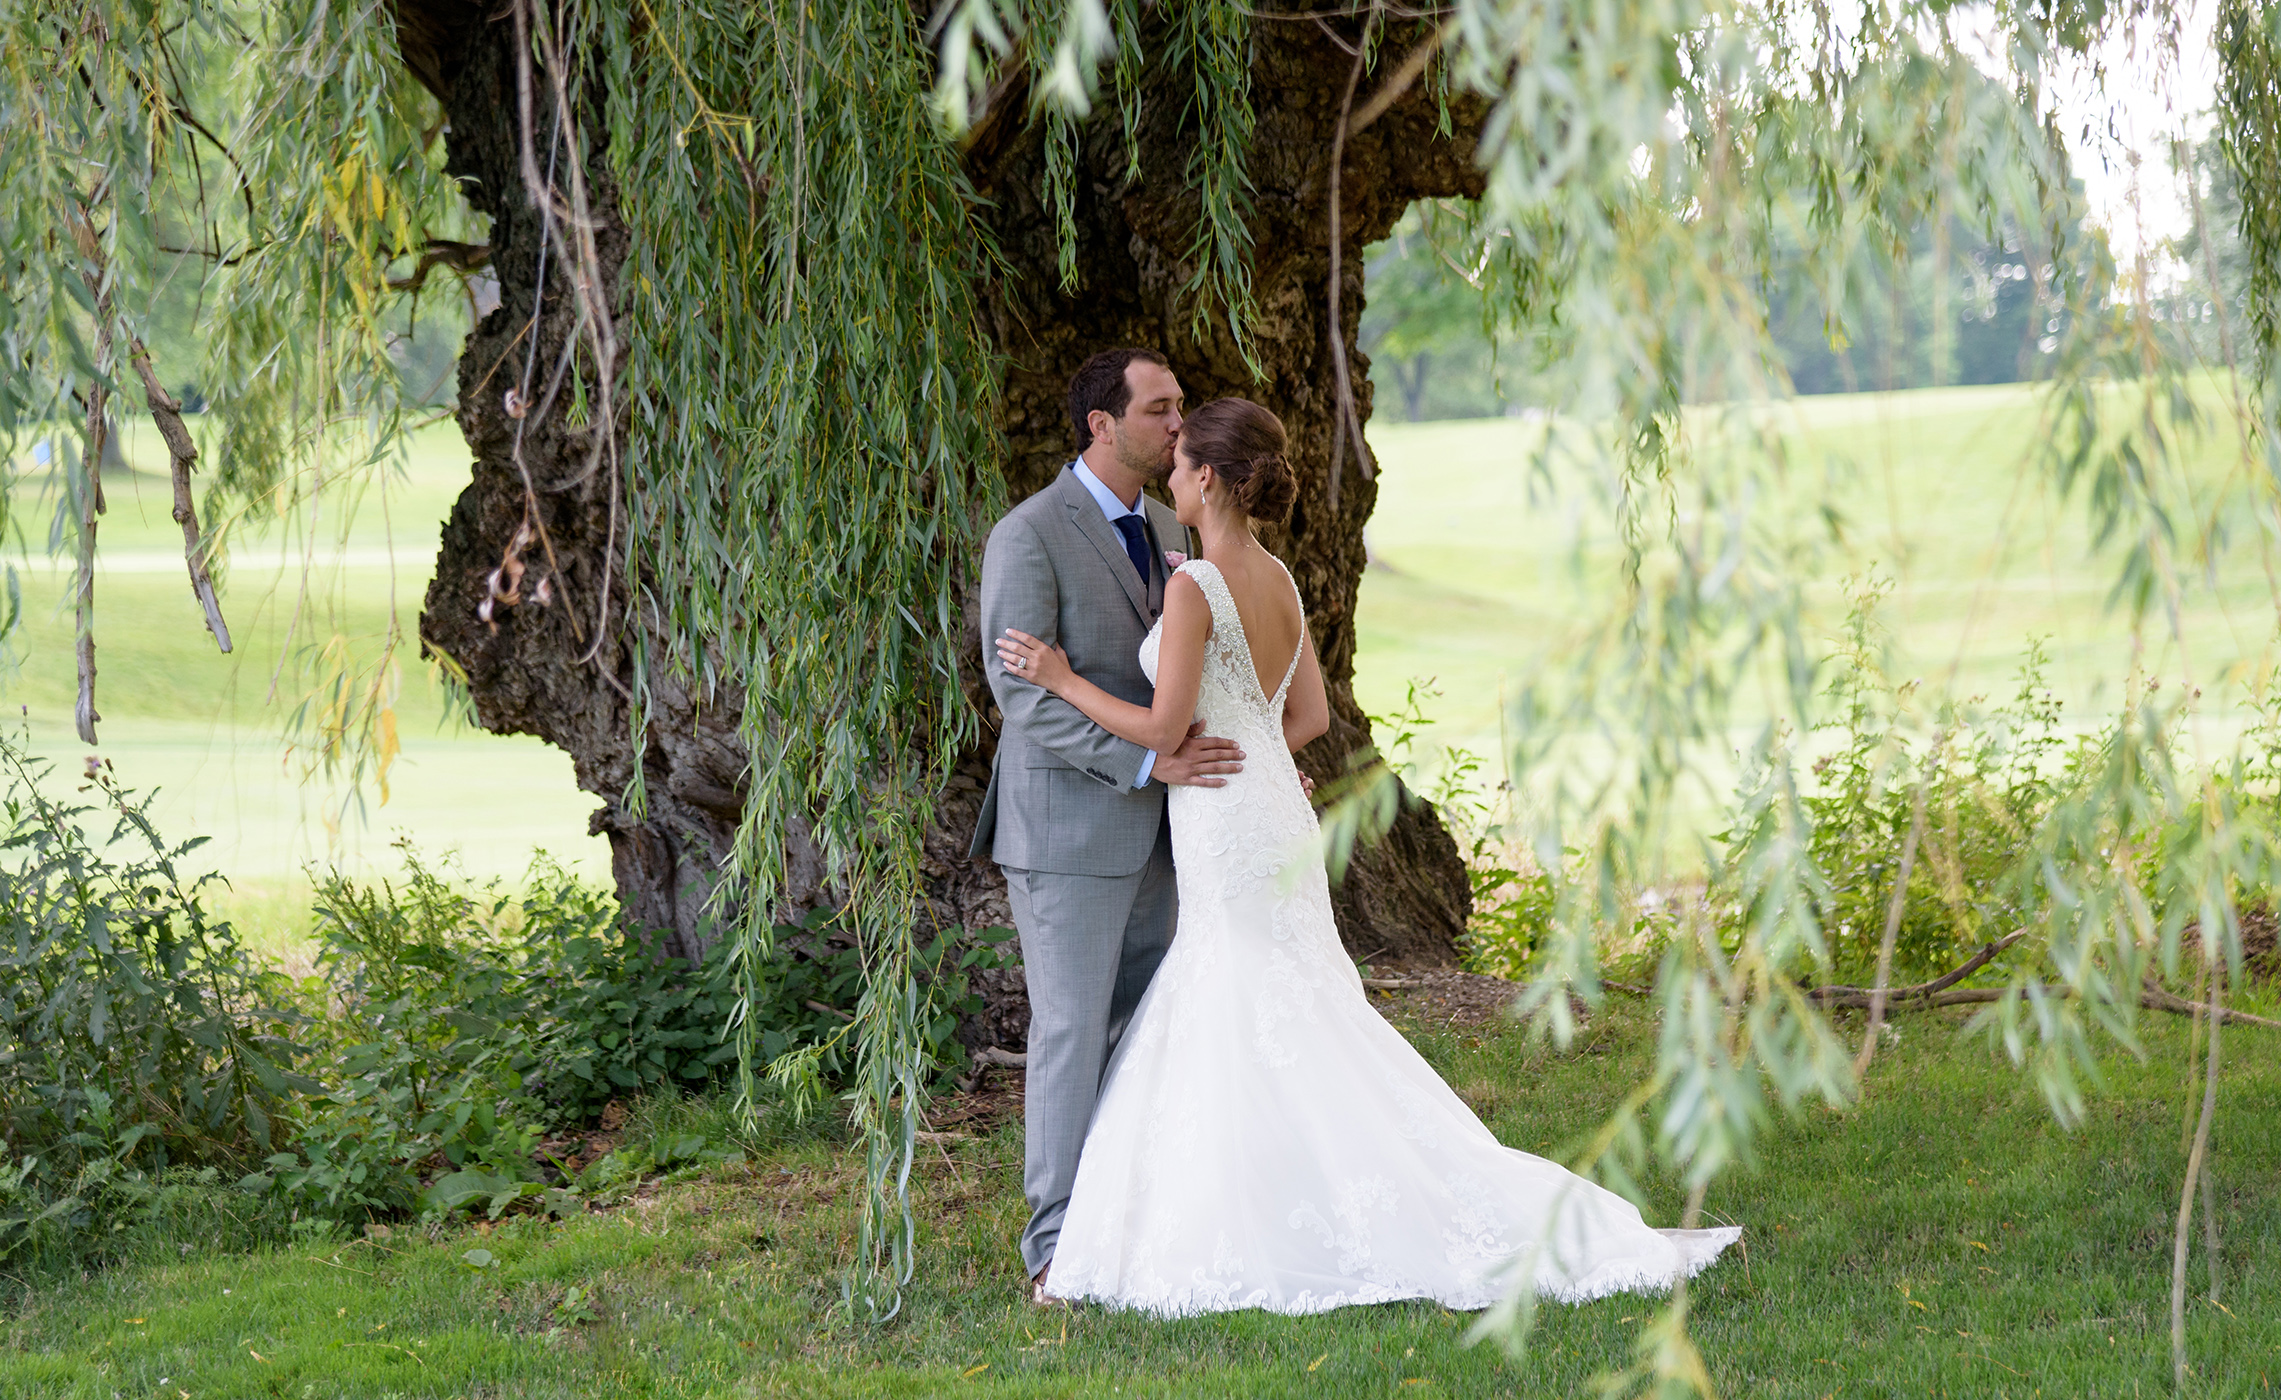 Shaker Heights Country Club Wedding